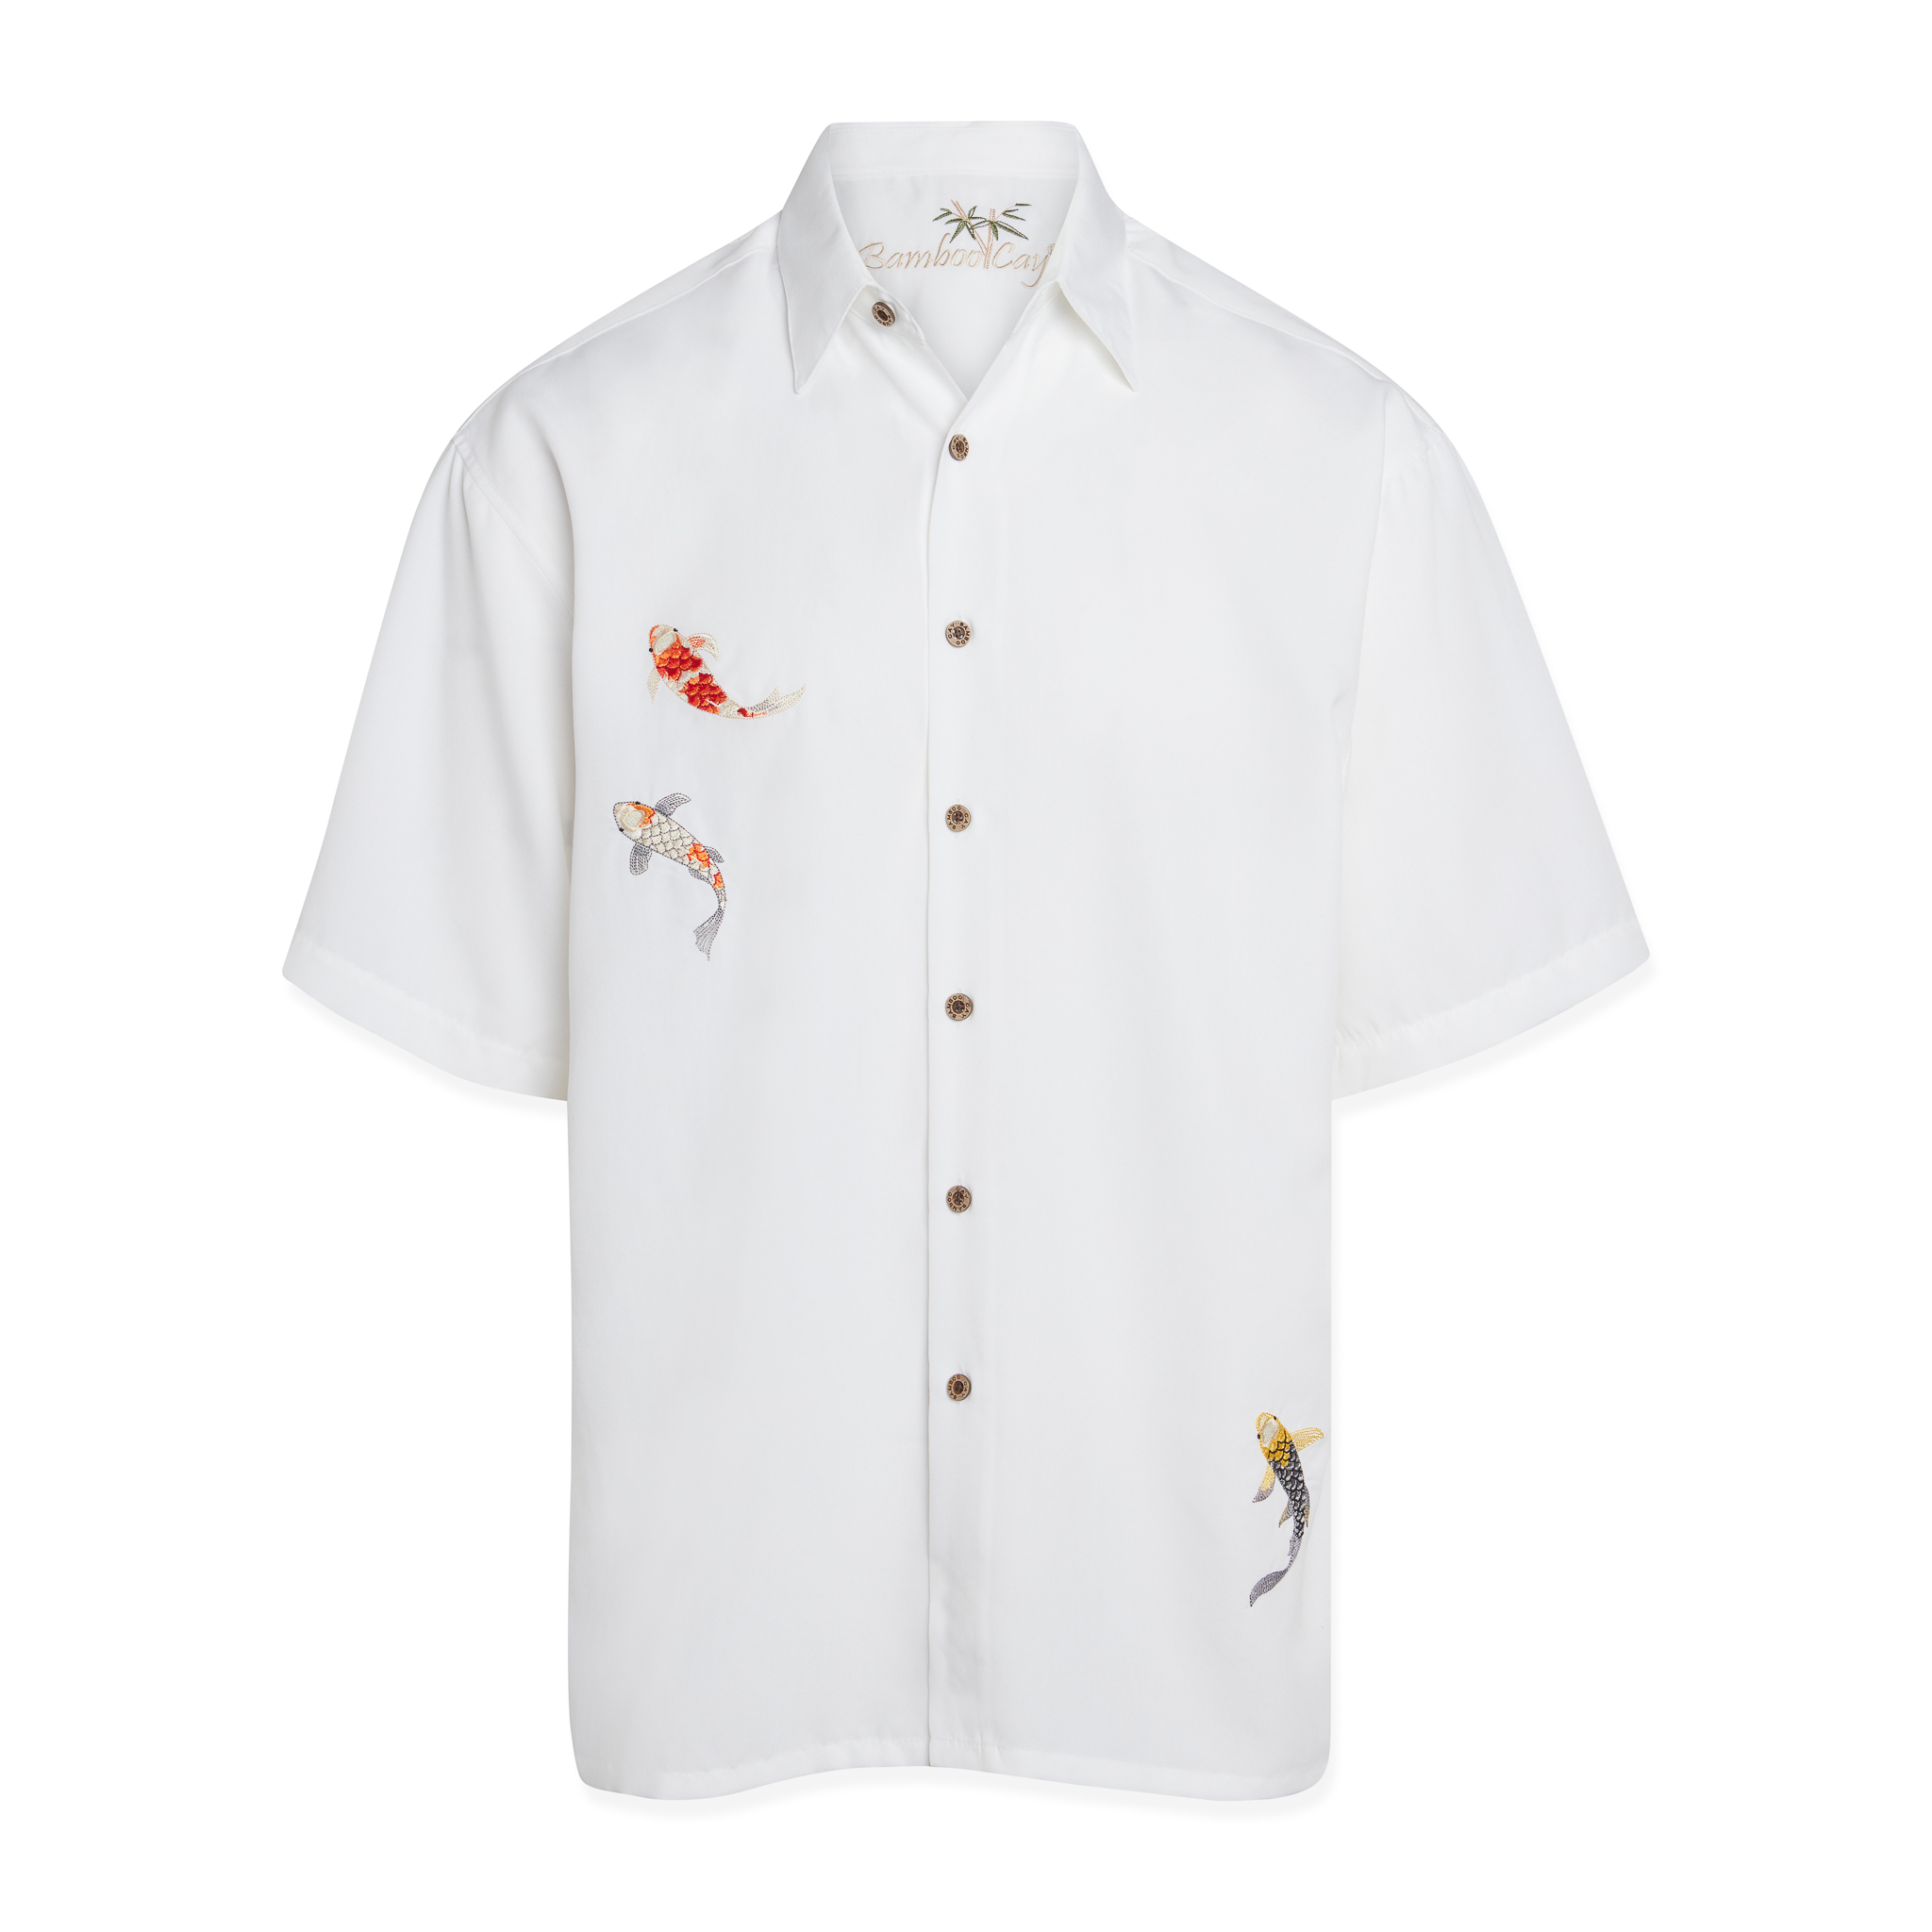 bamboo cay mens charming koi fish white colored embroidered shirt